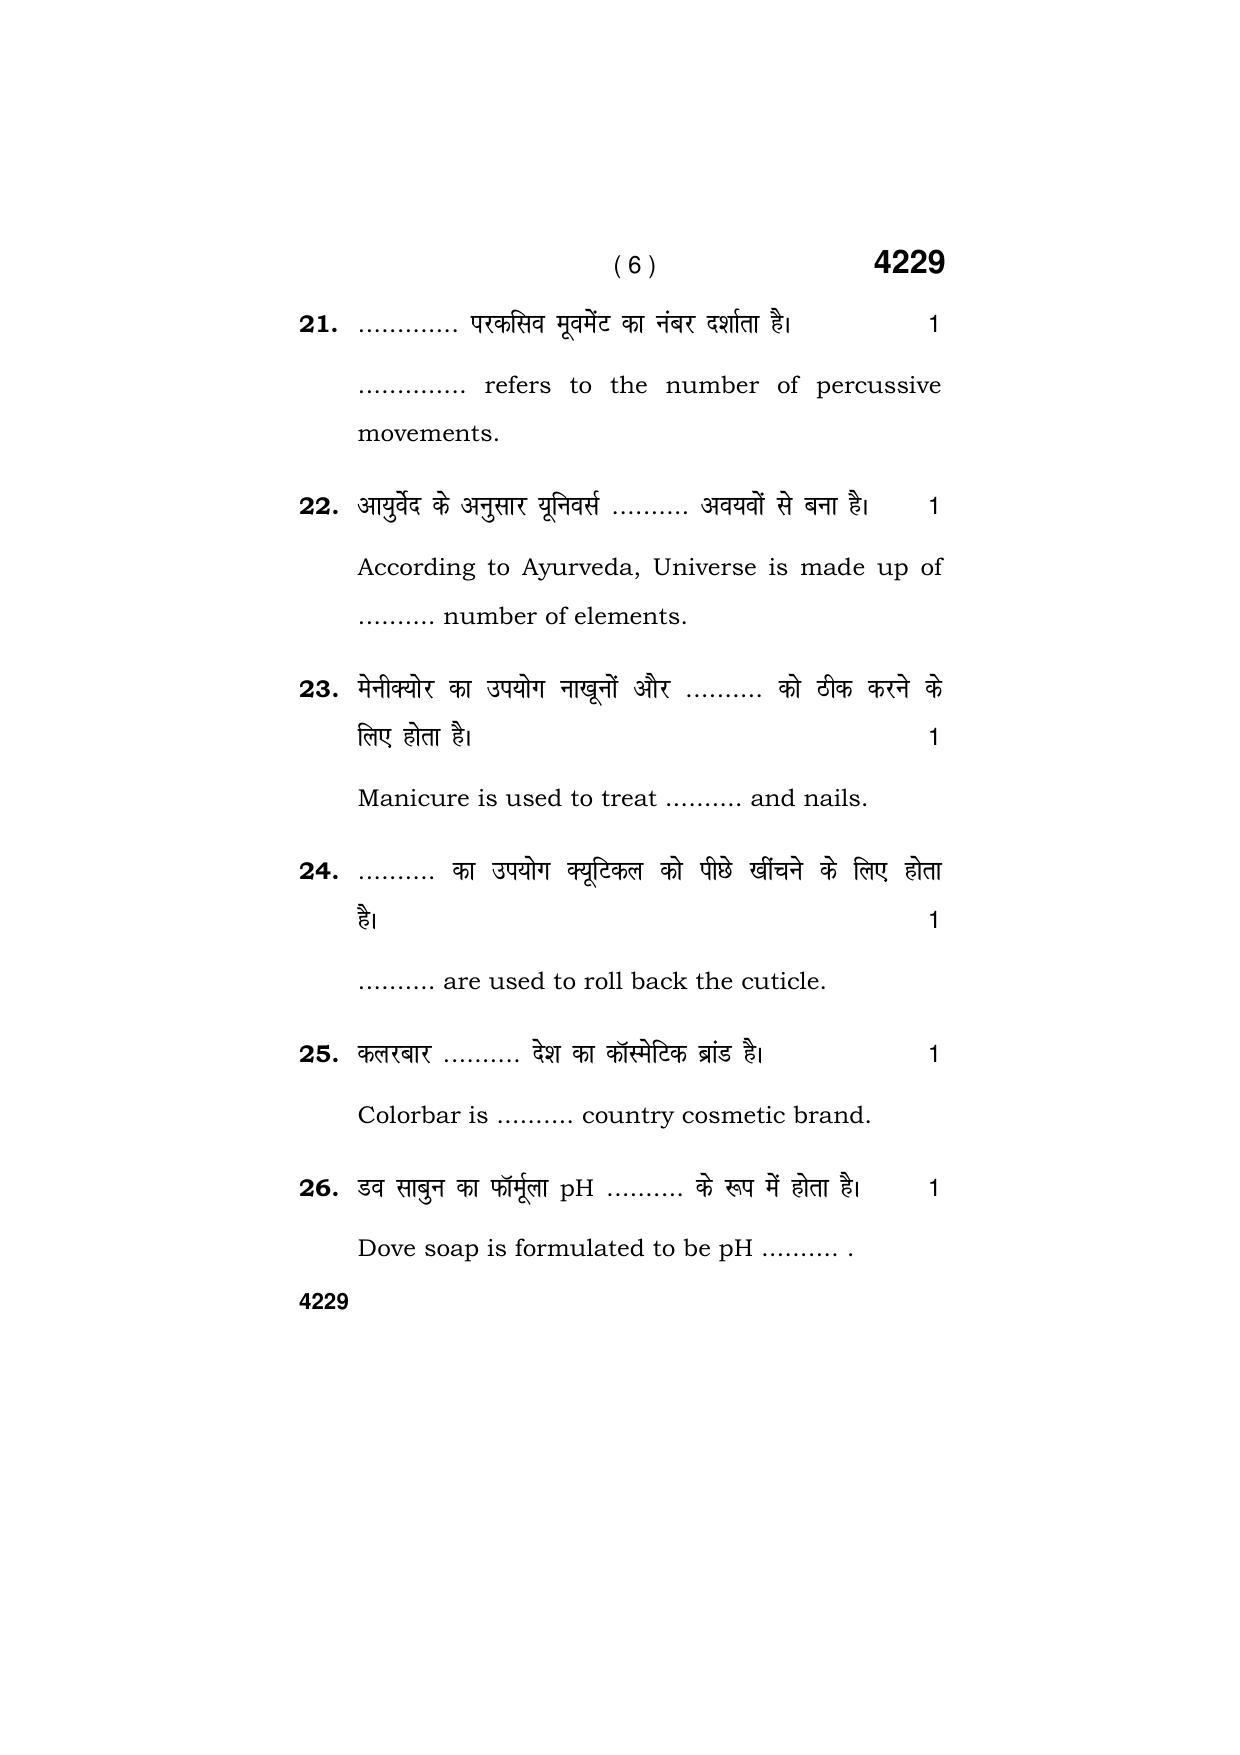 Haryana Board HBSE Class 10 Beauty & Wellness 2019 Question Paper - Page 6